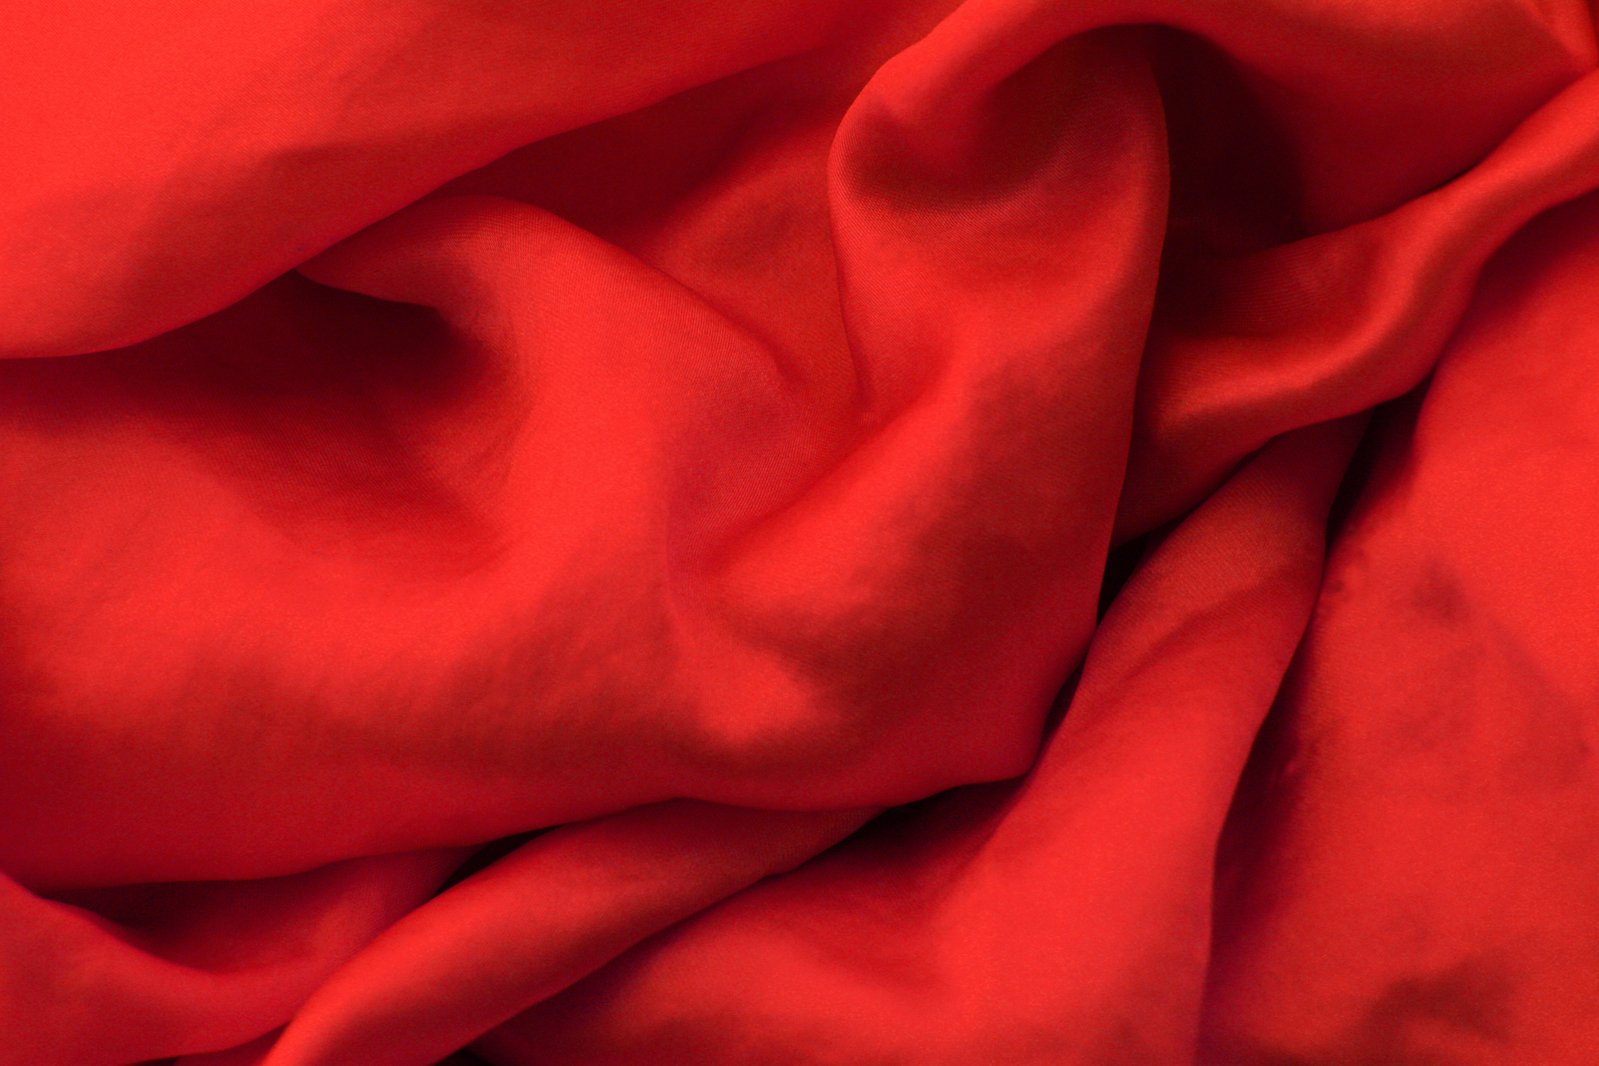 the red fabric is soft and smooth